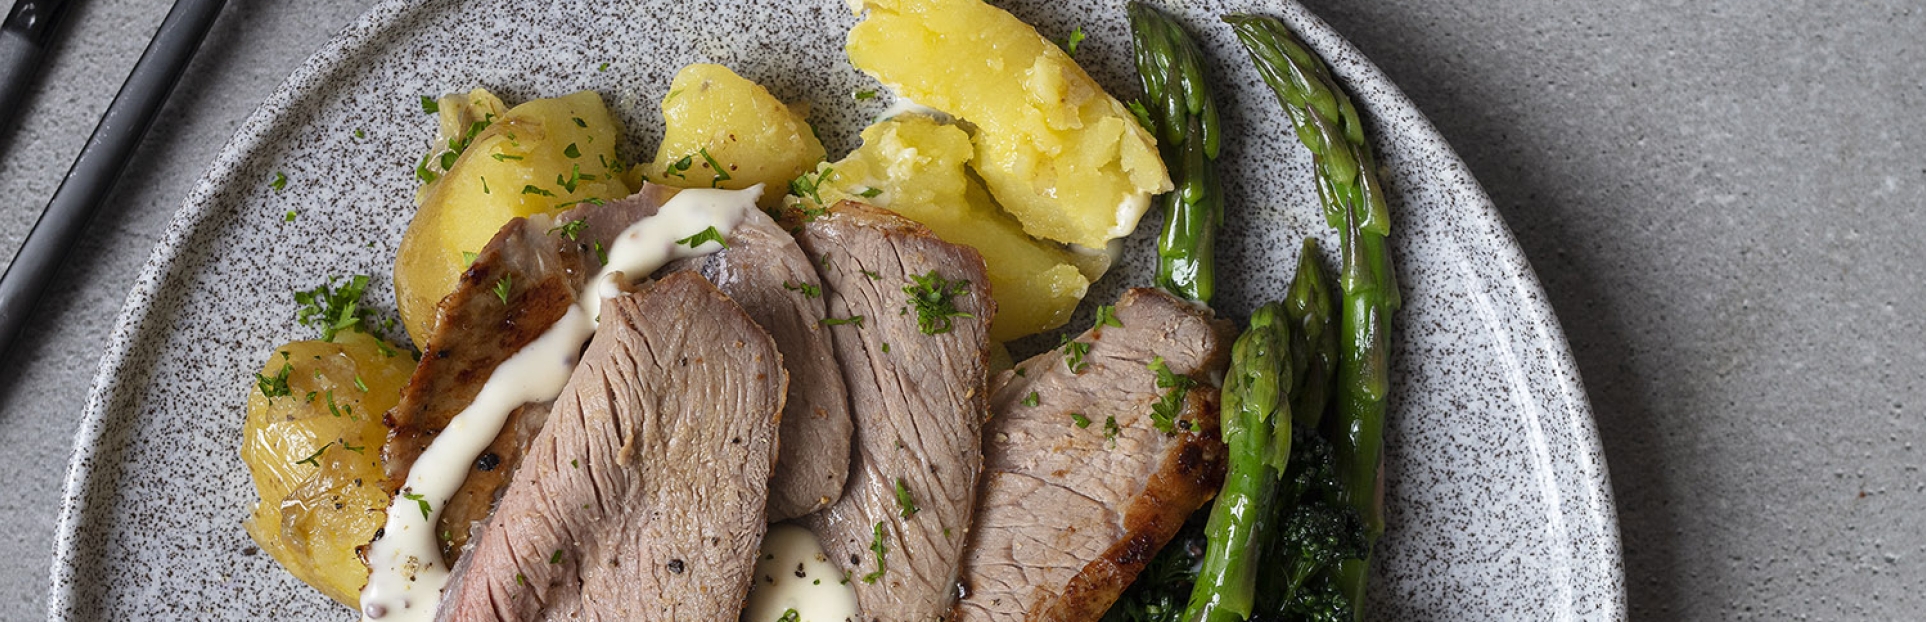 roast lamb with sauce and vegetables on a plate